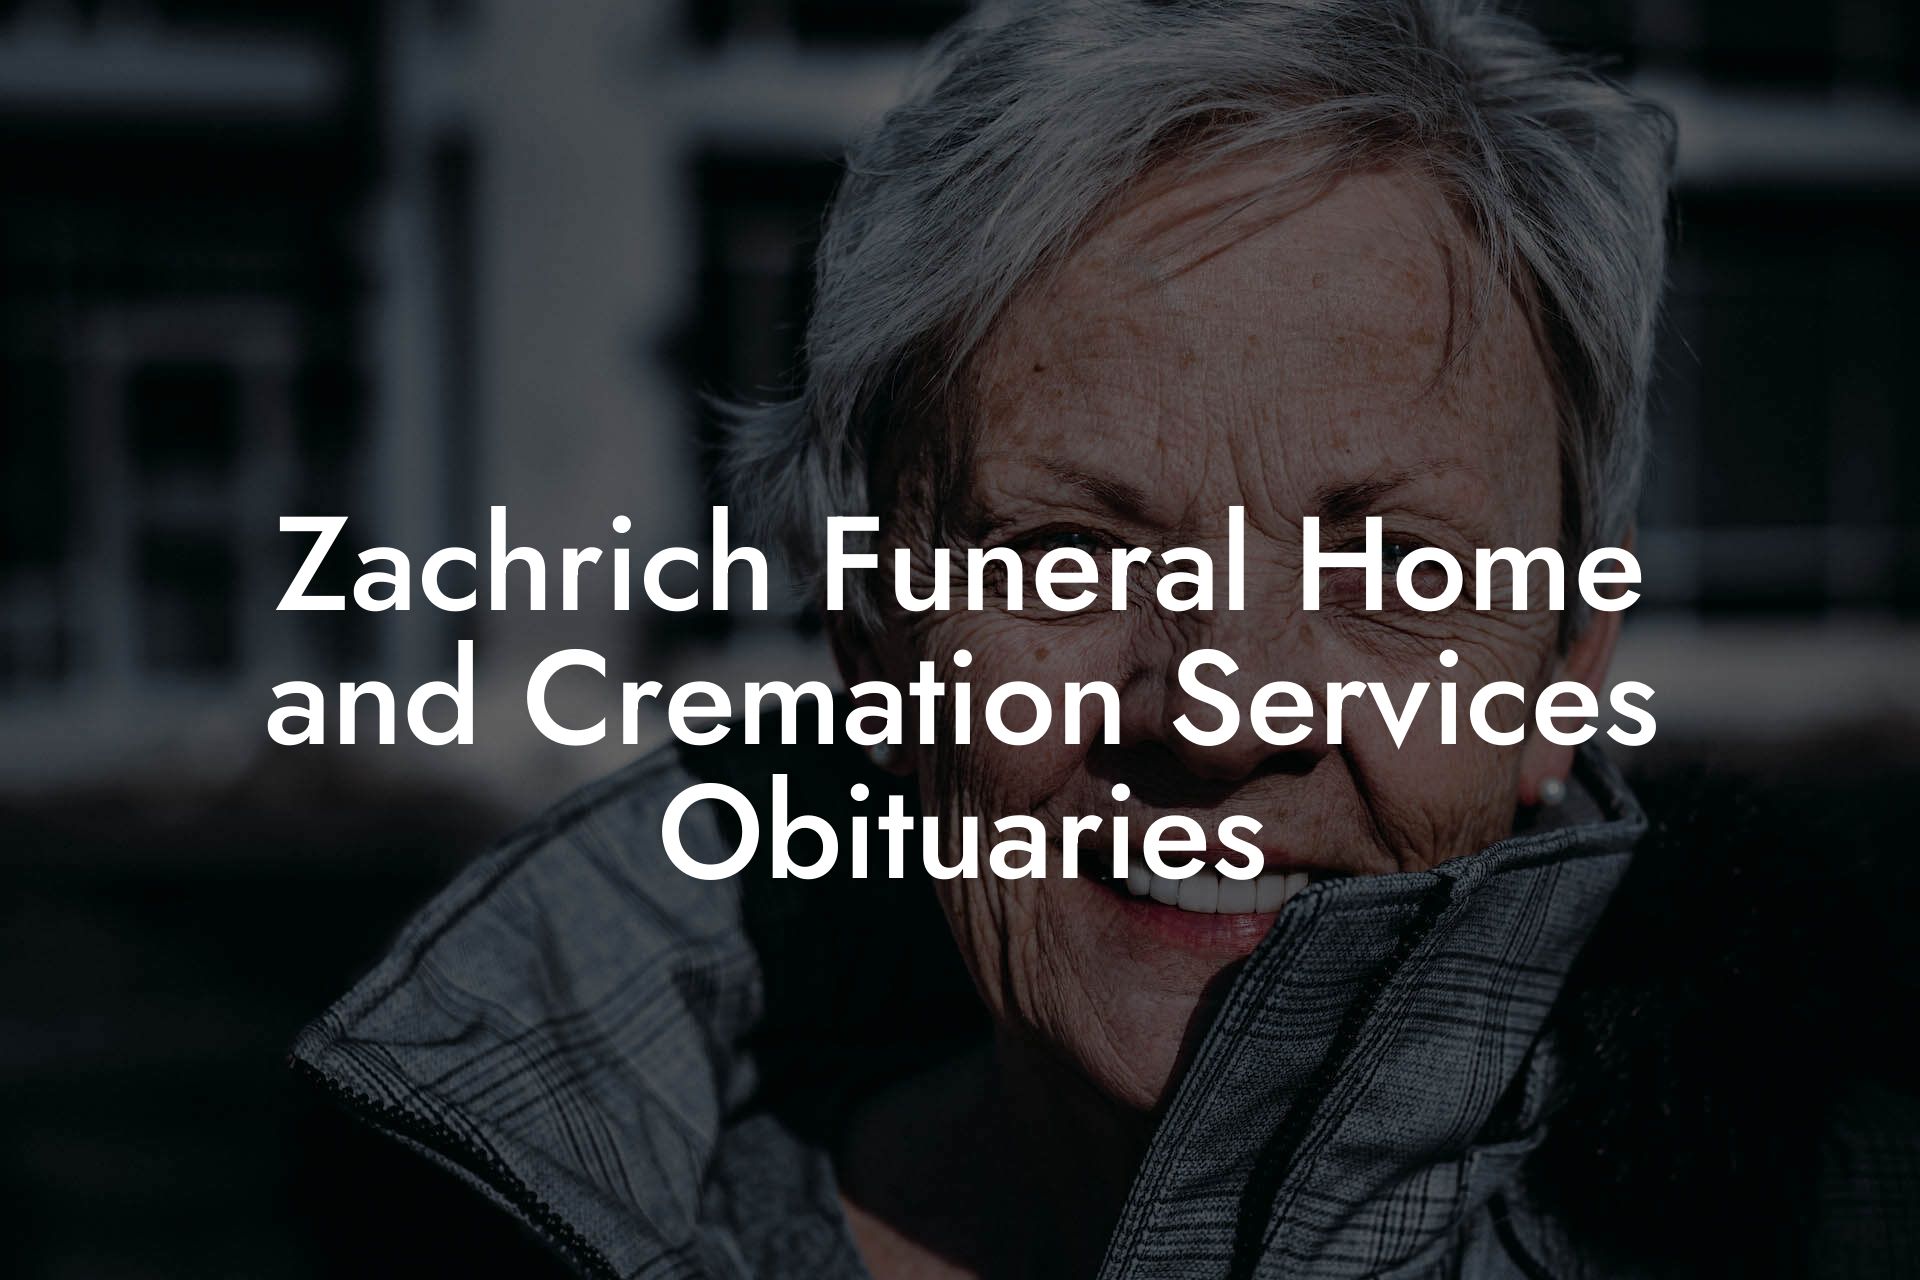 Zachrich Funeral Home and Cremation Services Obituaries